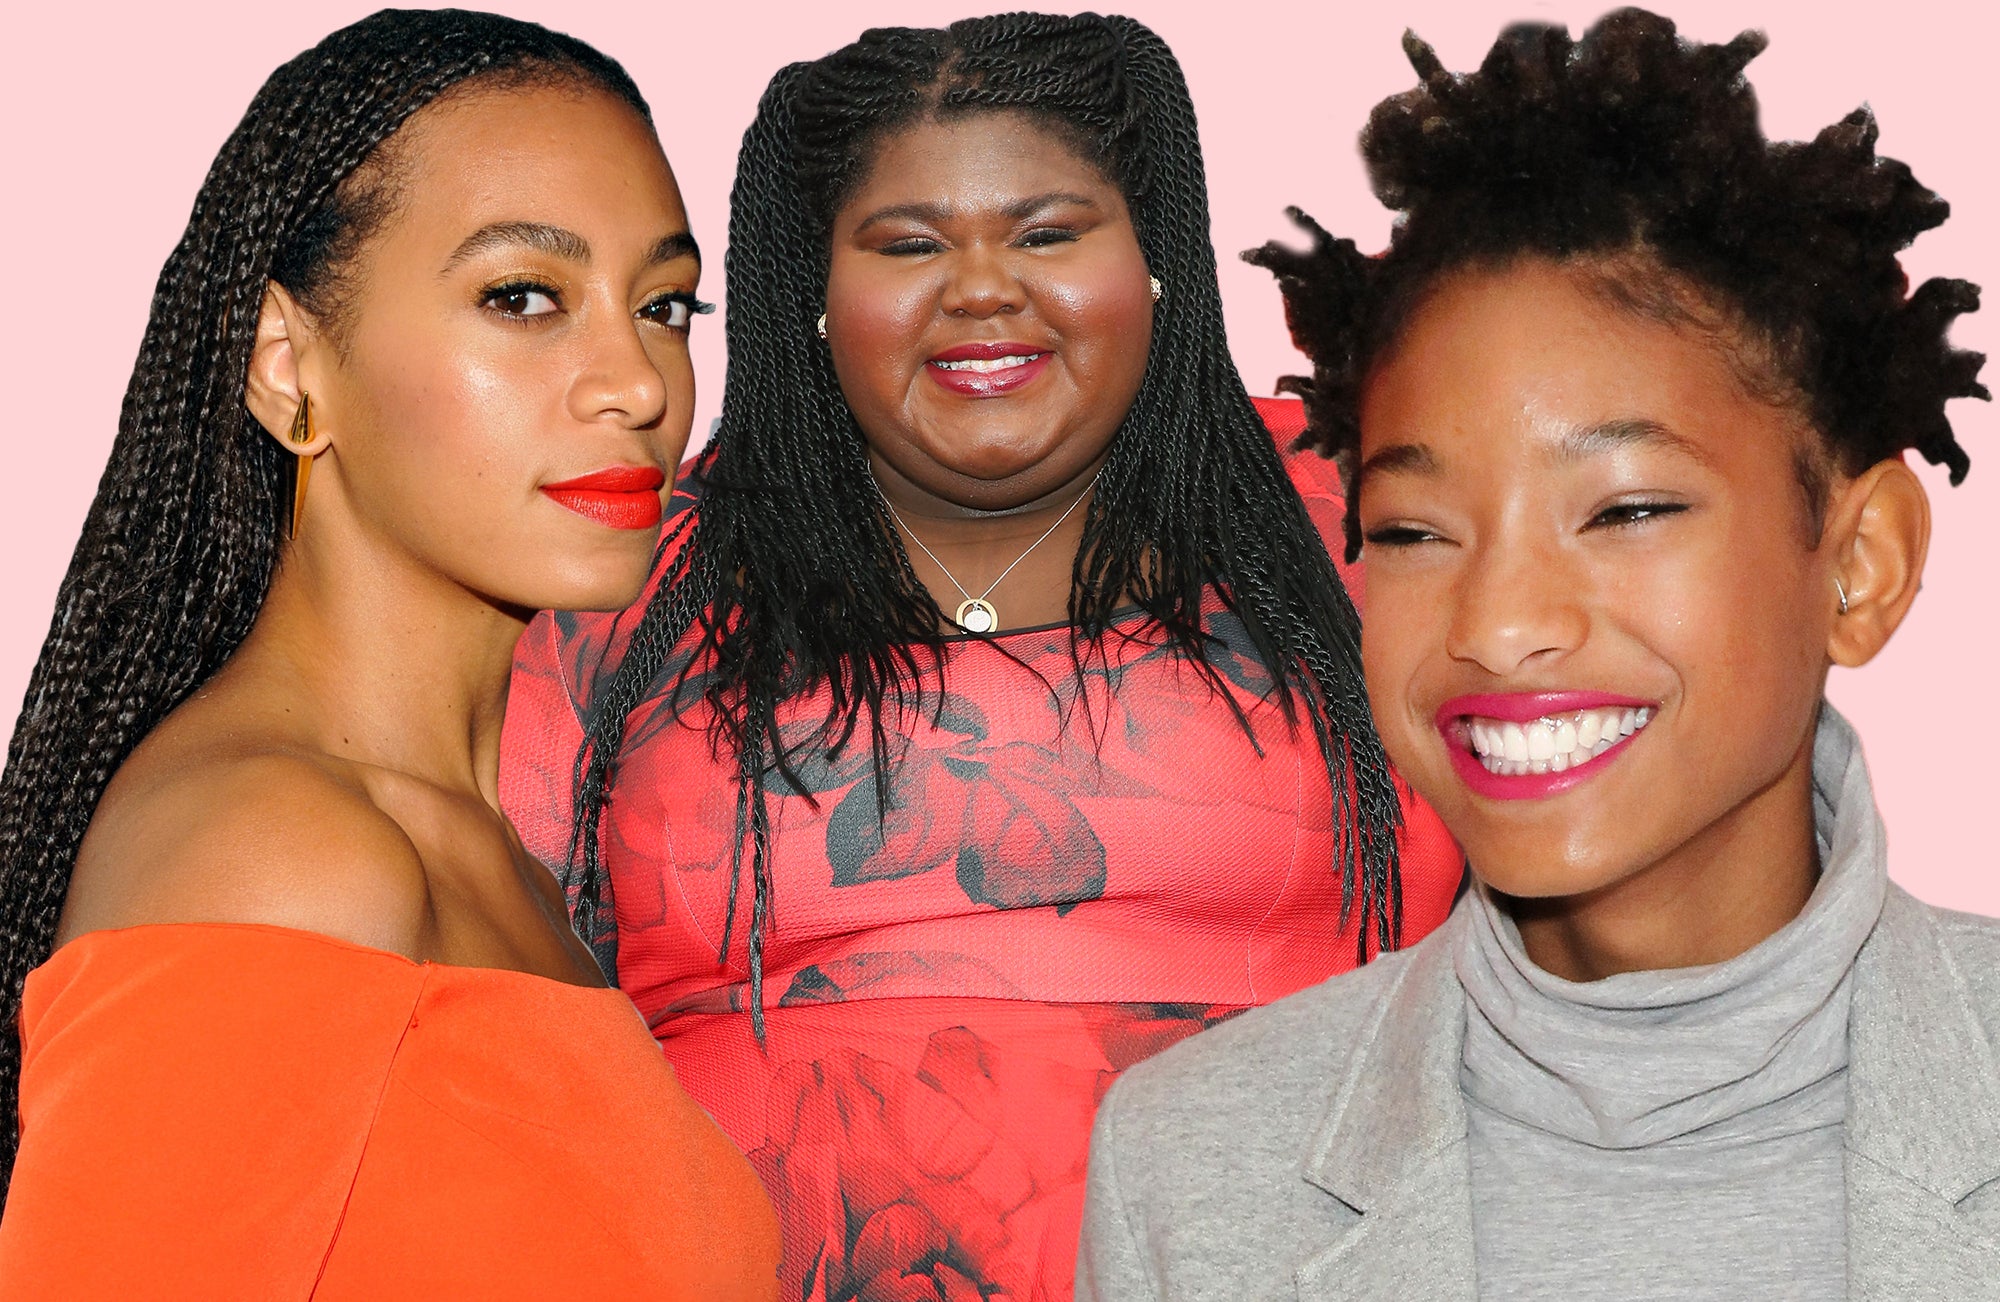 17 Reasons Why 2015 Was Year of the Carefree Black Girl